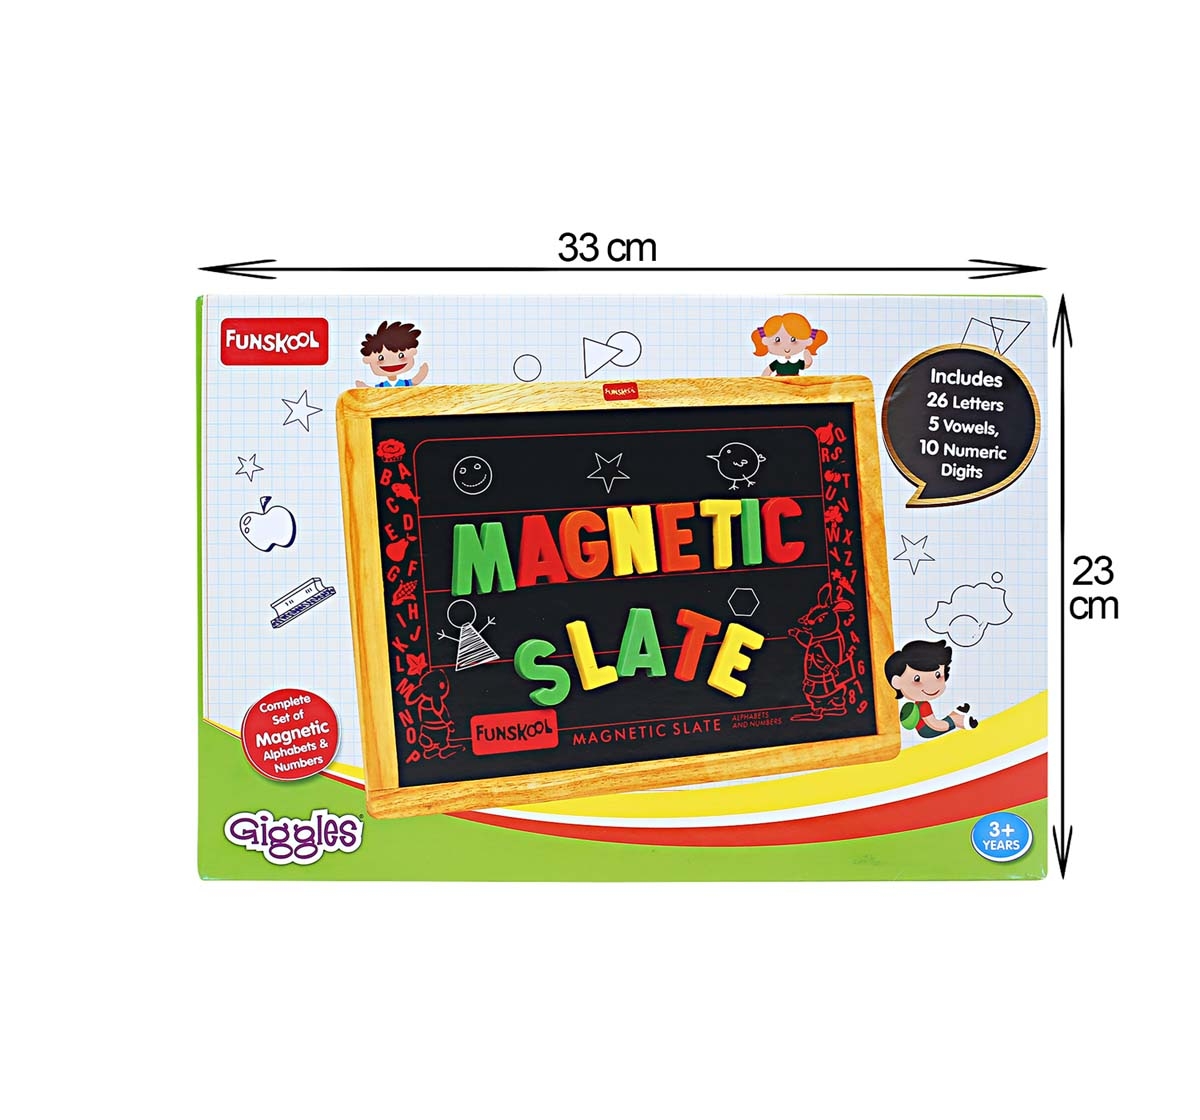 Funskool Magnetic Slate Activity Table & Boards for Kids age 3Y+ 